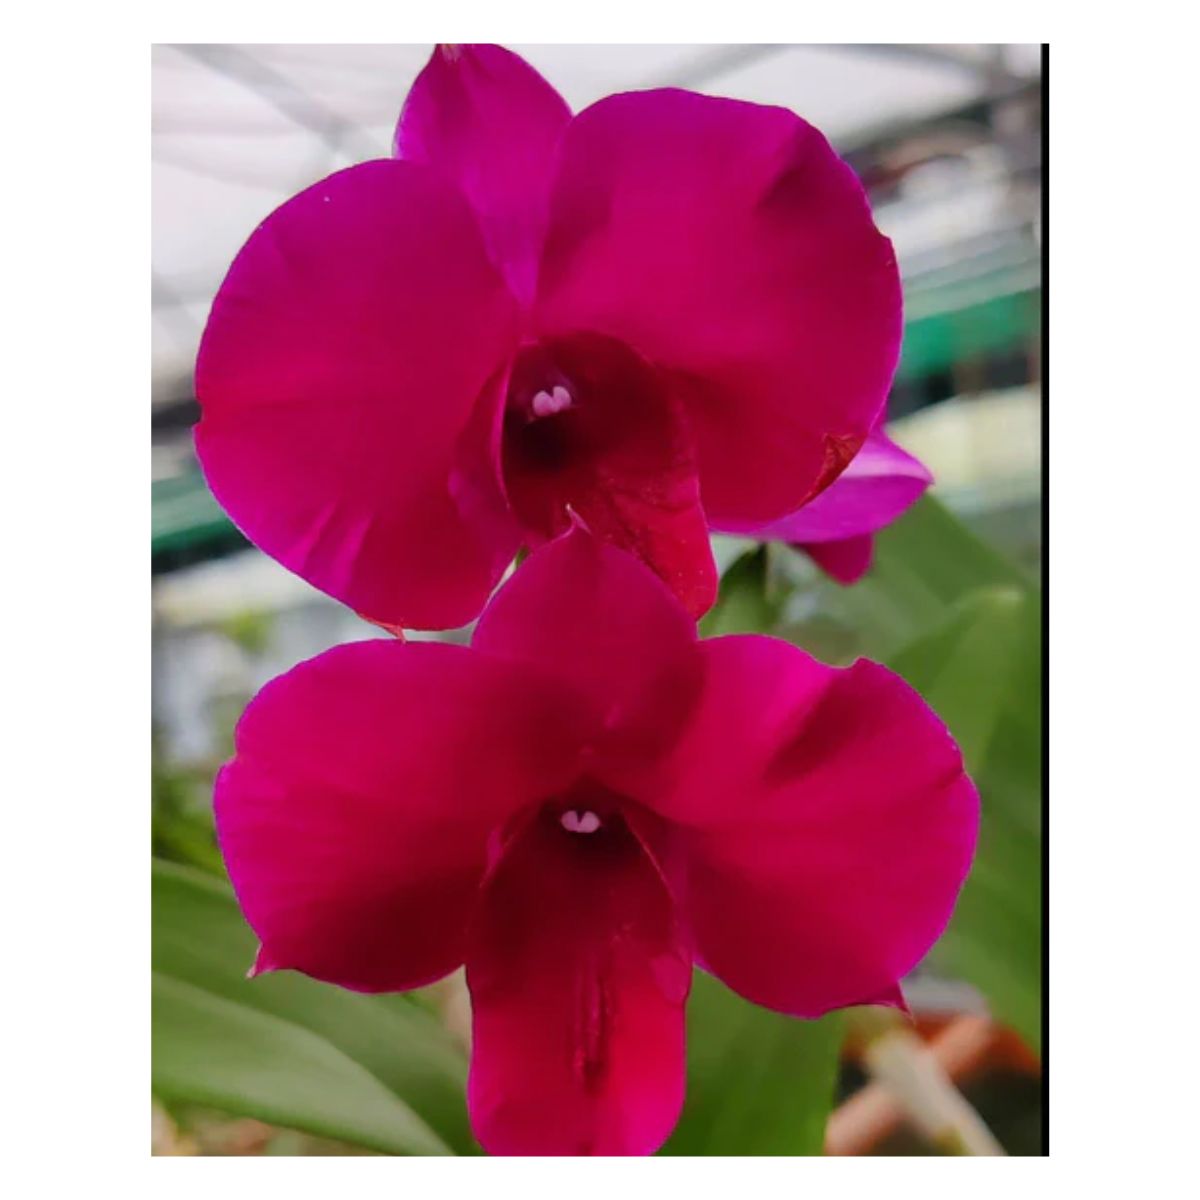 Dendrobium Malai Red orchid with vibrant red blooms